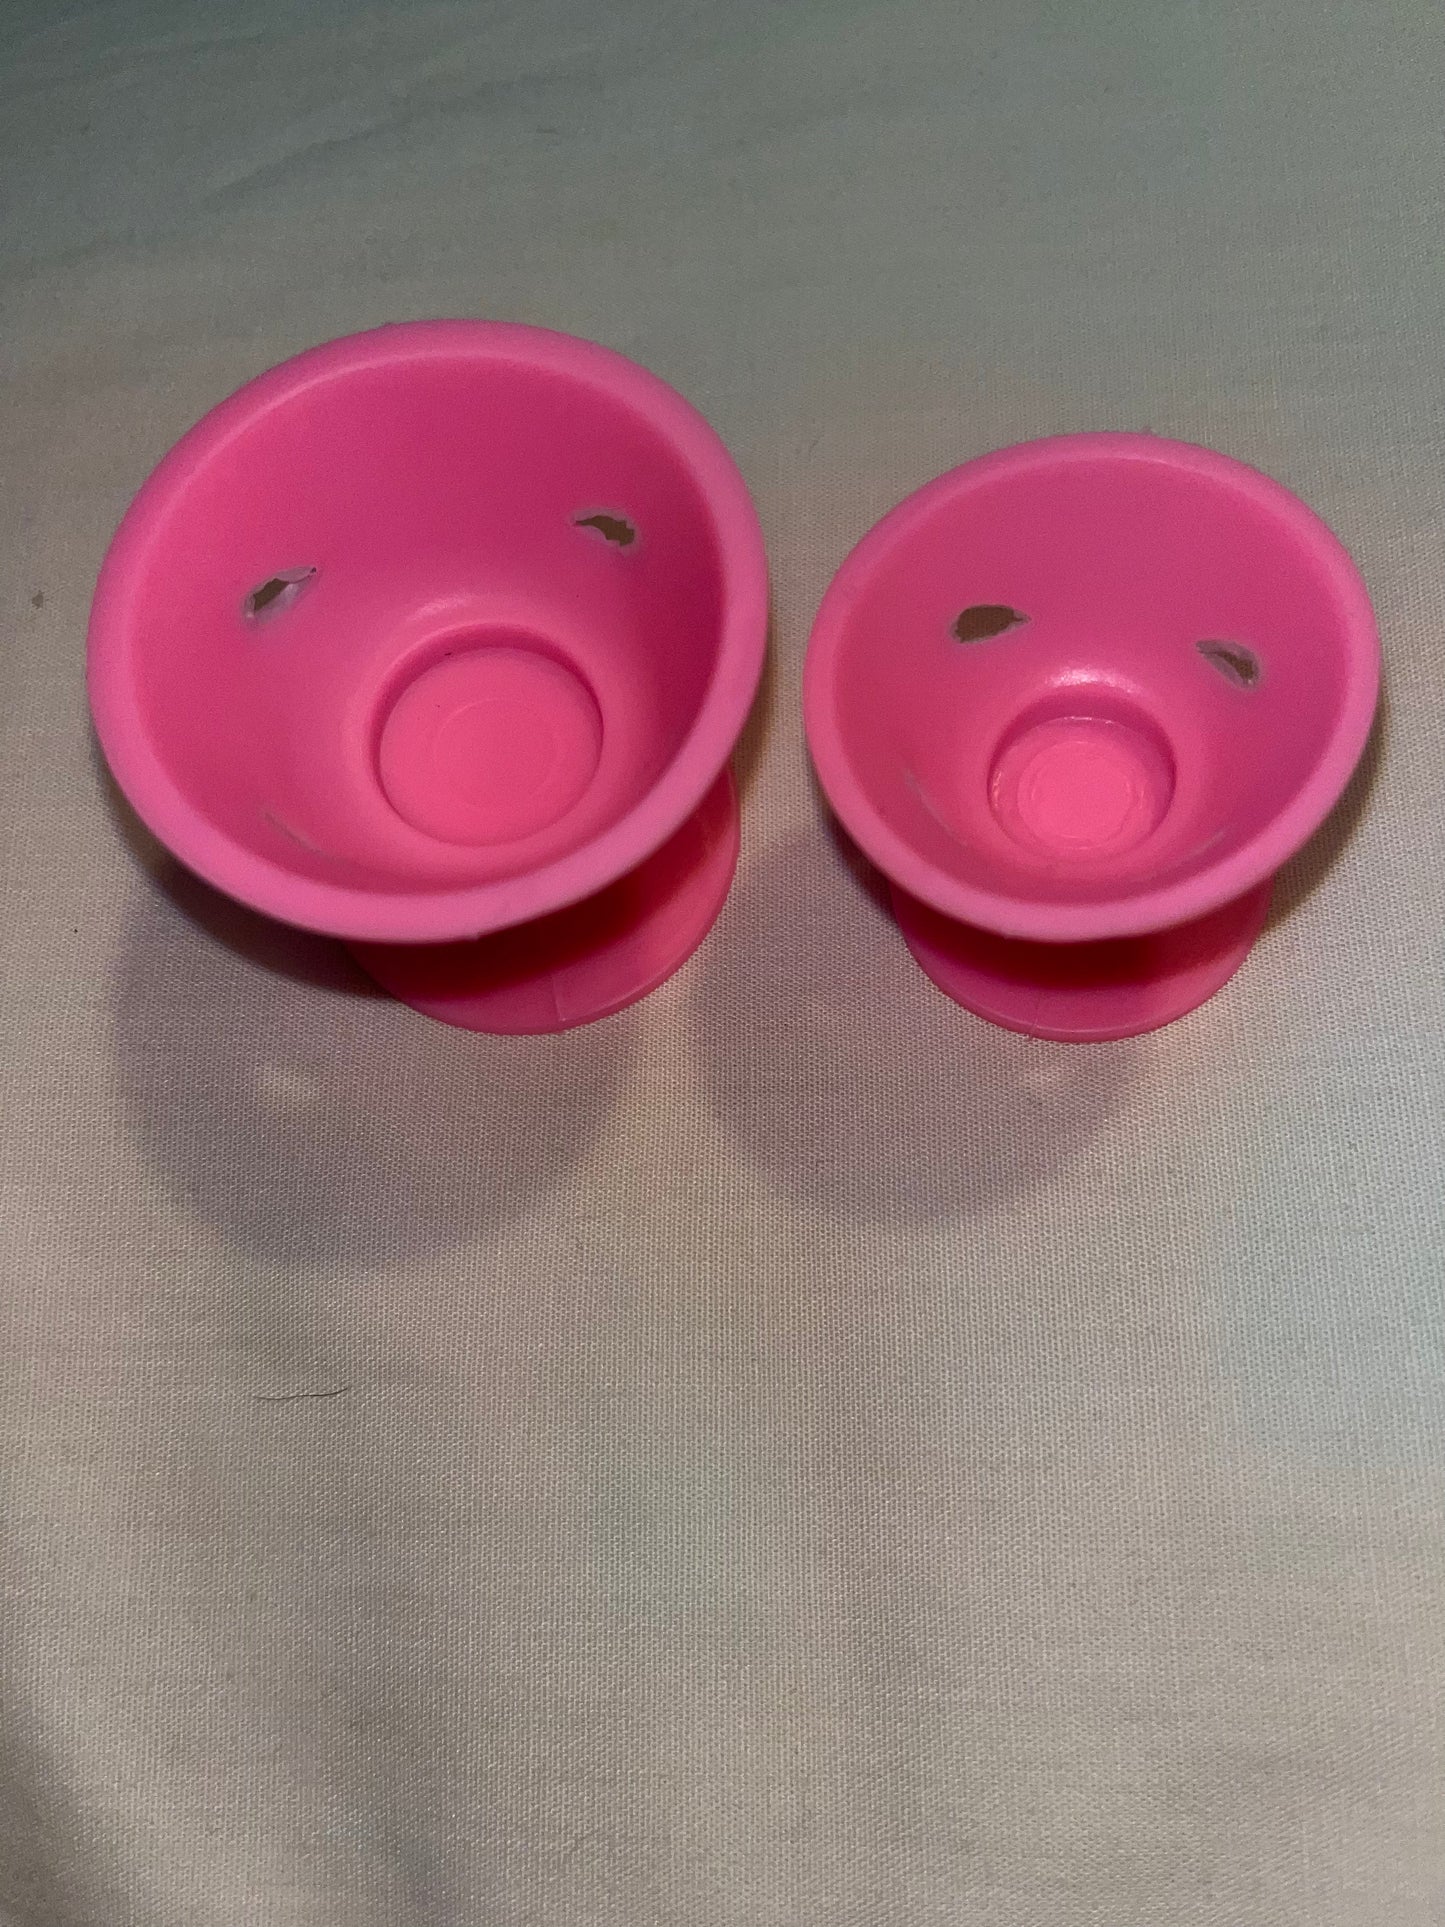 Silicone Hair Rollers